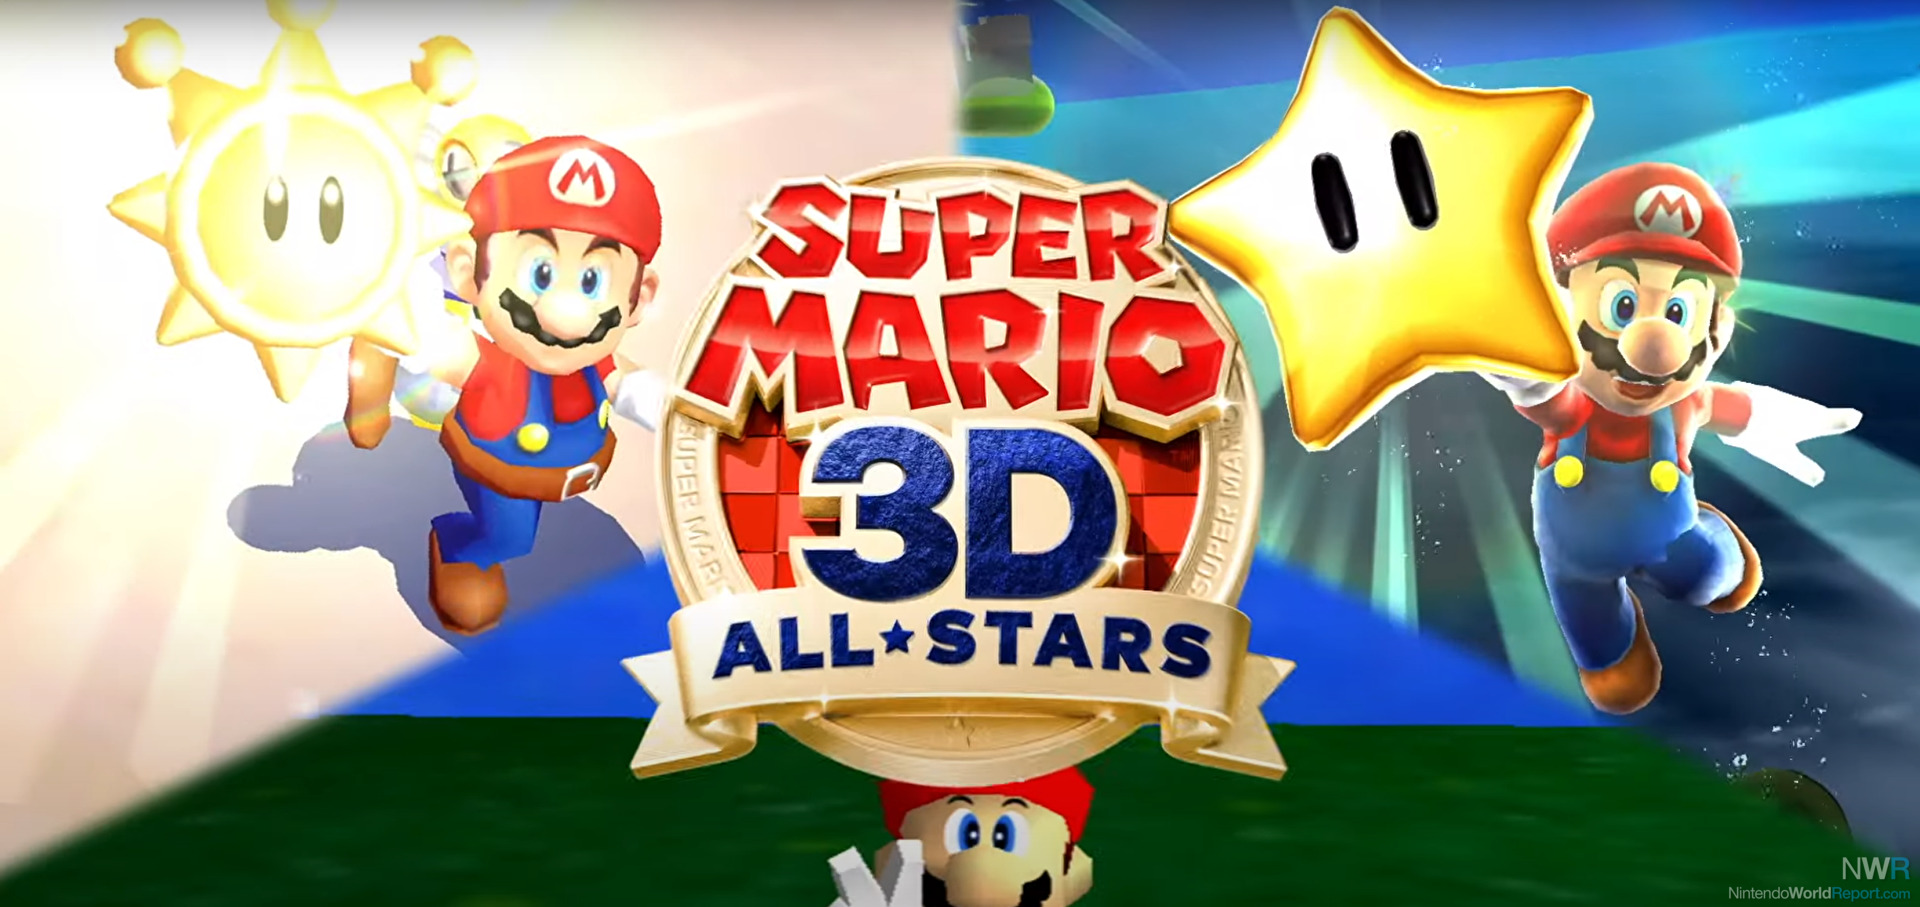 Super Mario 3D All Stars Brings Platforming Goodness to Switch - News -  Nintendo World Report